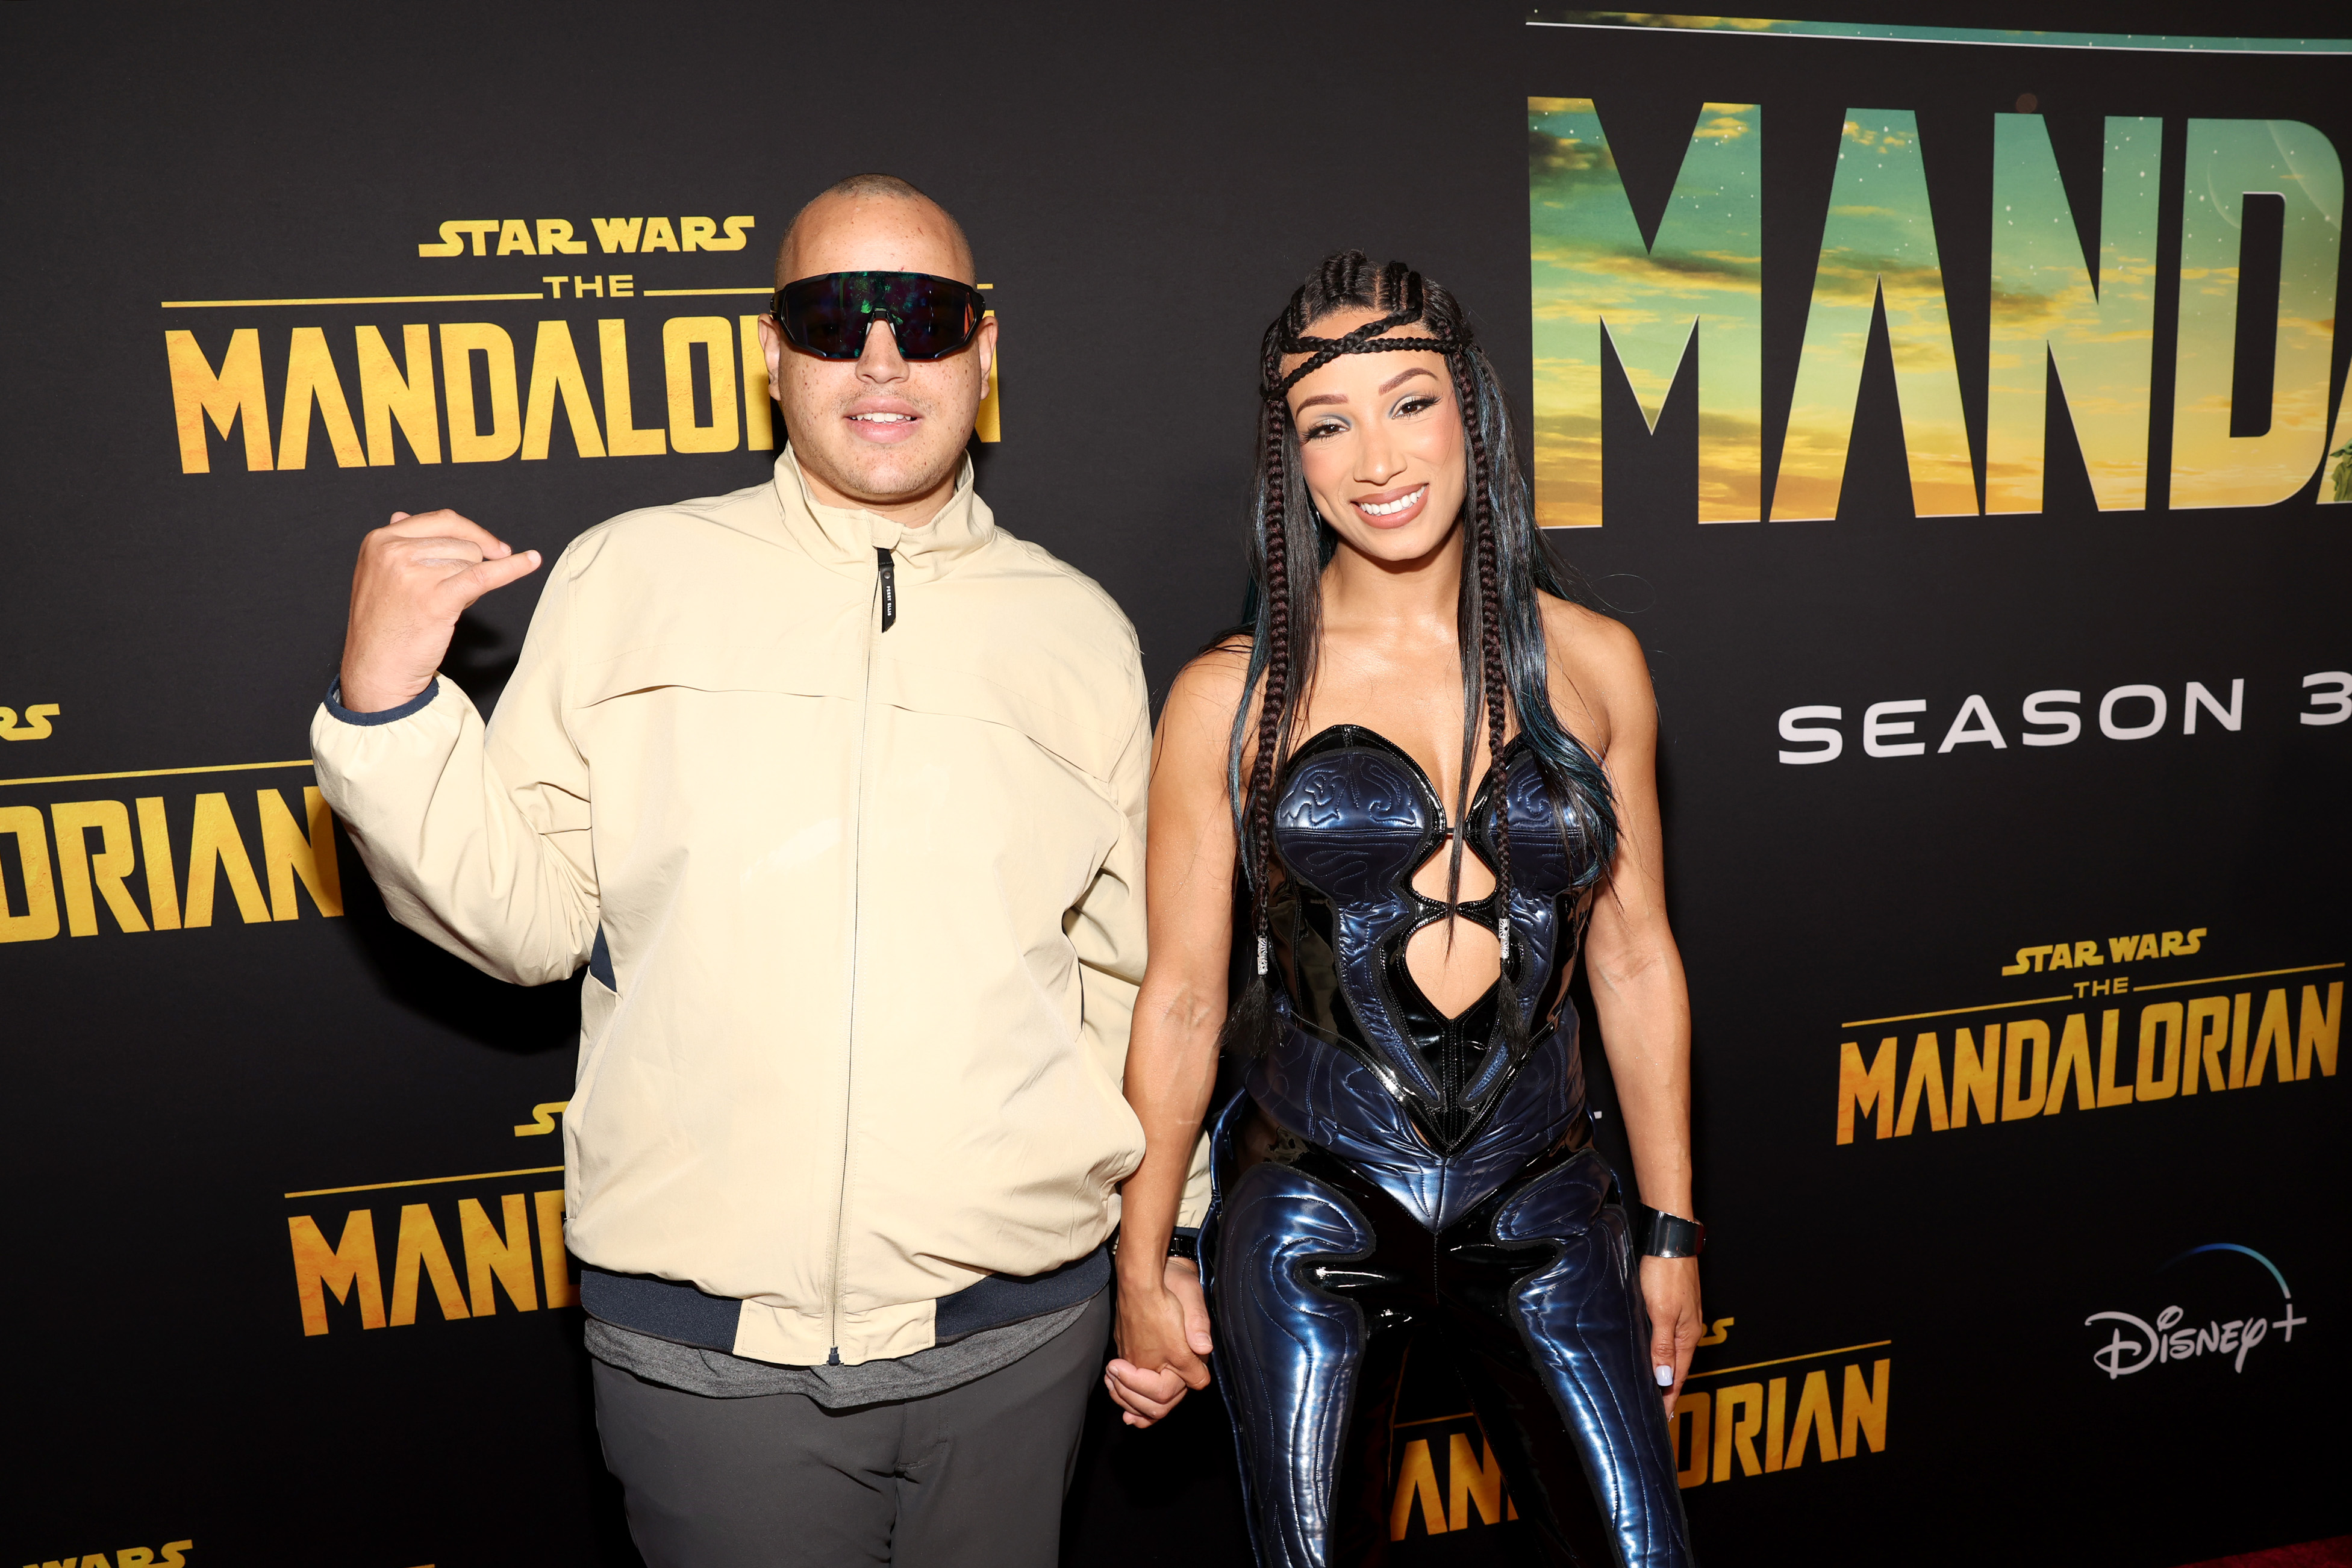 Sarath Ton and Mercedes Varnado during "The Mandalorian" special launch event at El Capitan Theatre in Hollywood, California, on February 28, 2023. | Source: Getty Images